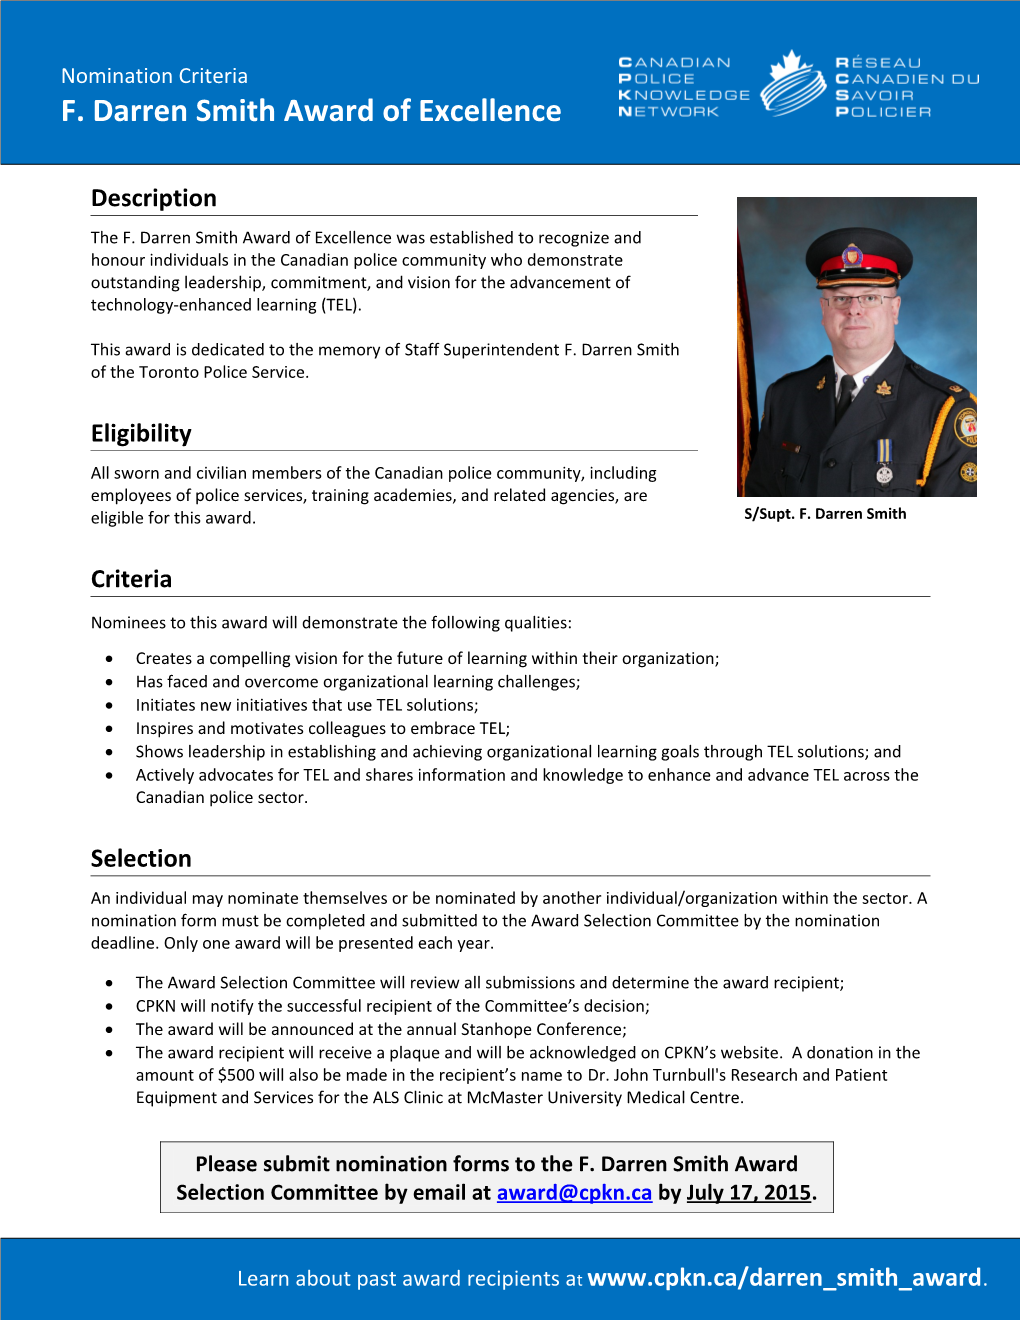 F. Darren Smith Award of Excellence Nomination Form 1